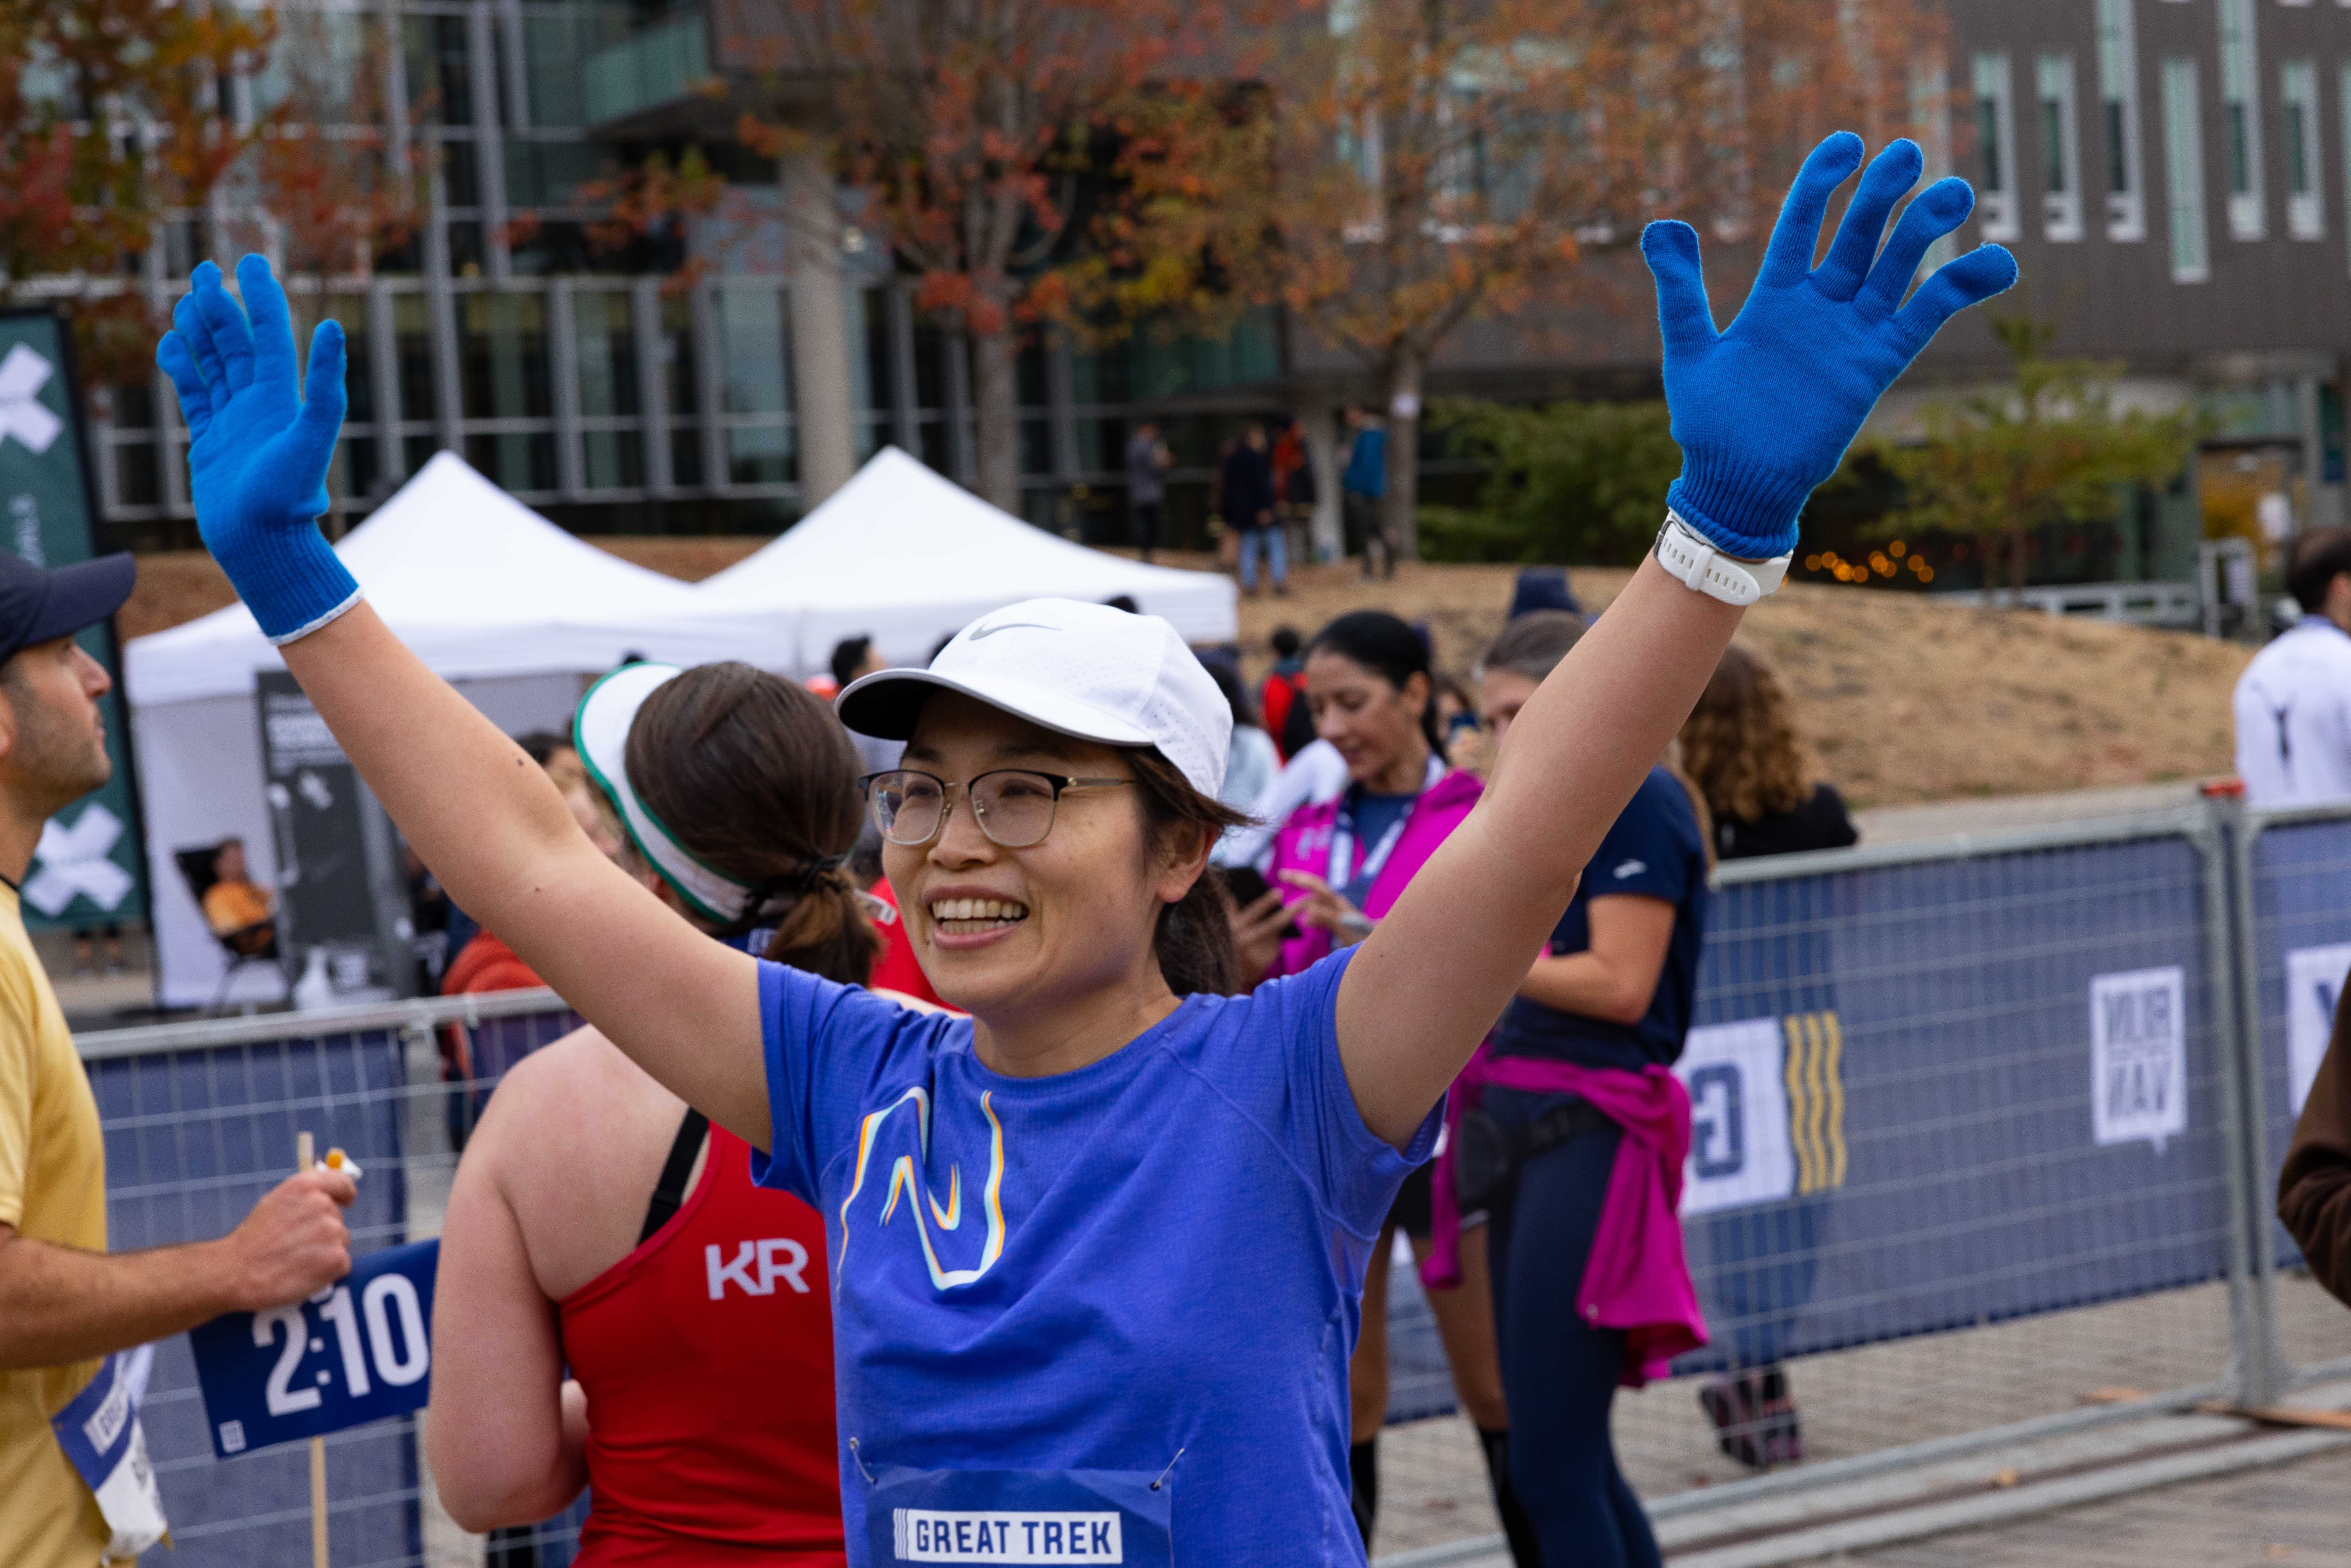 A runner celebrates at the finish line.